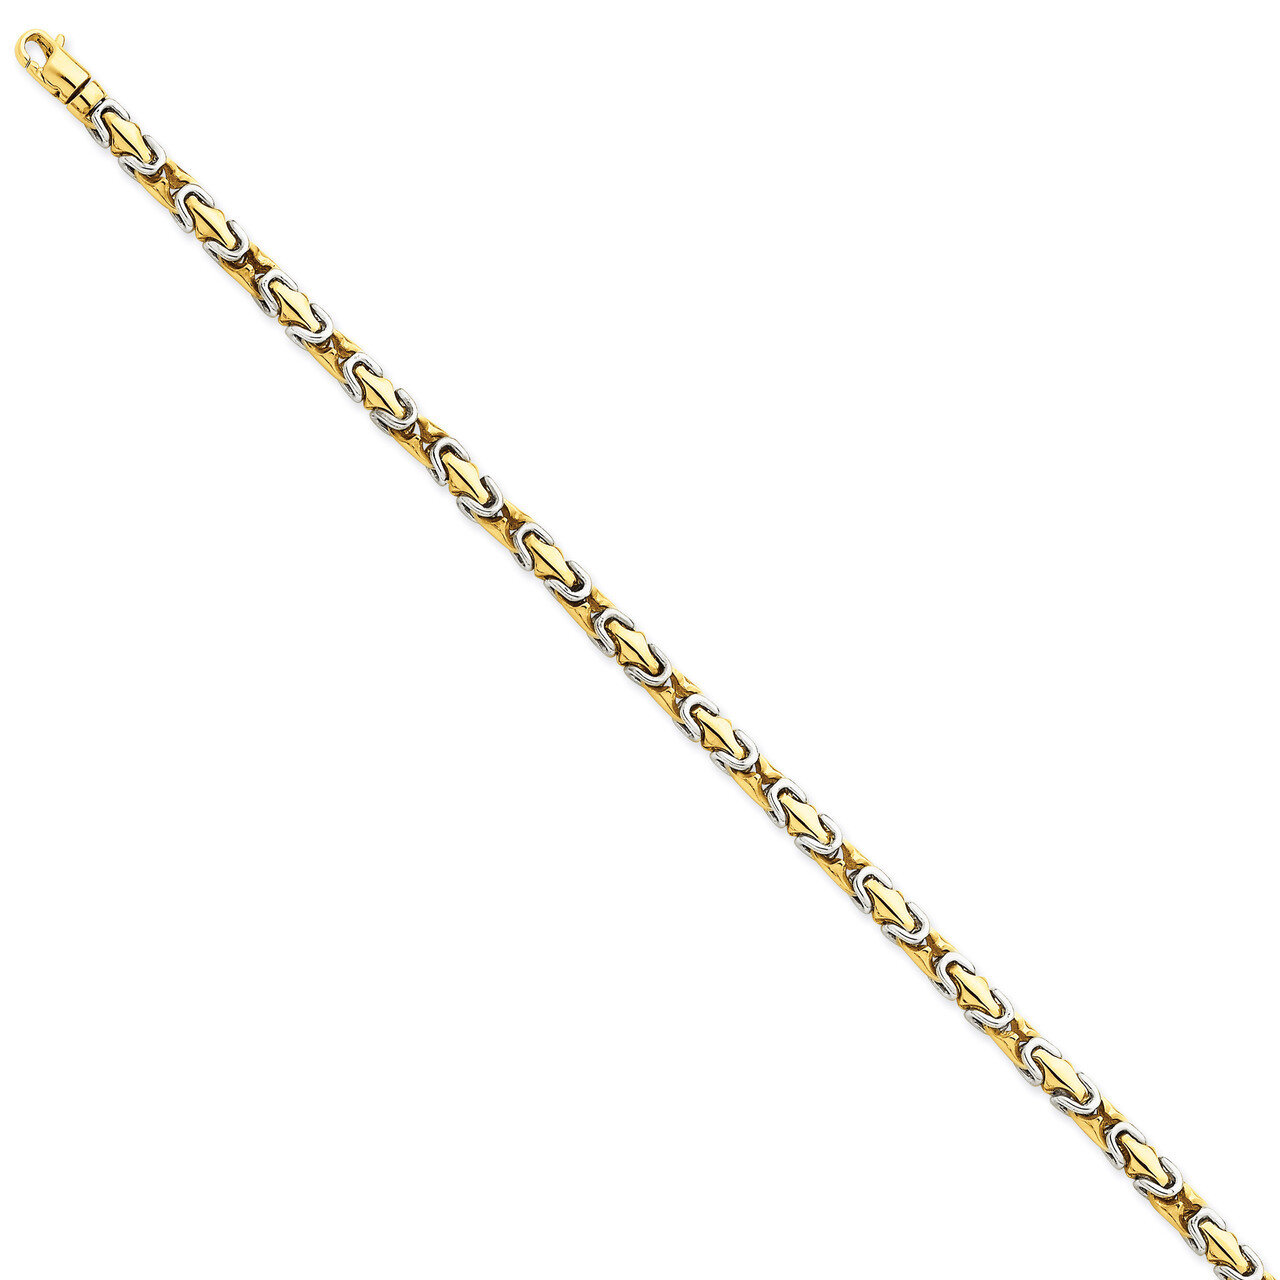 4.1mm Polished Fancy Link Chain 9 Inch 14k Two-Tone Gold LK571-9